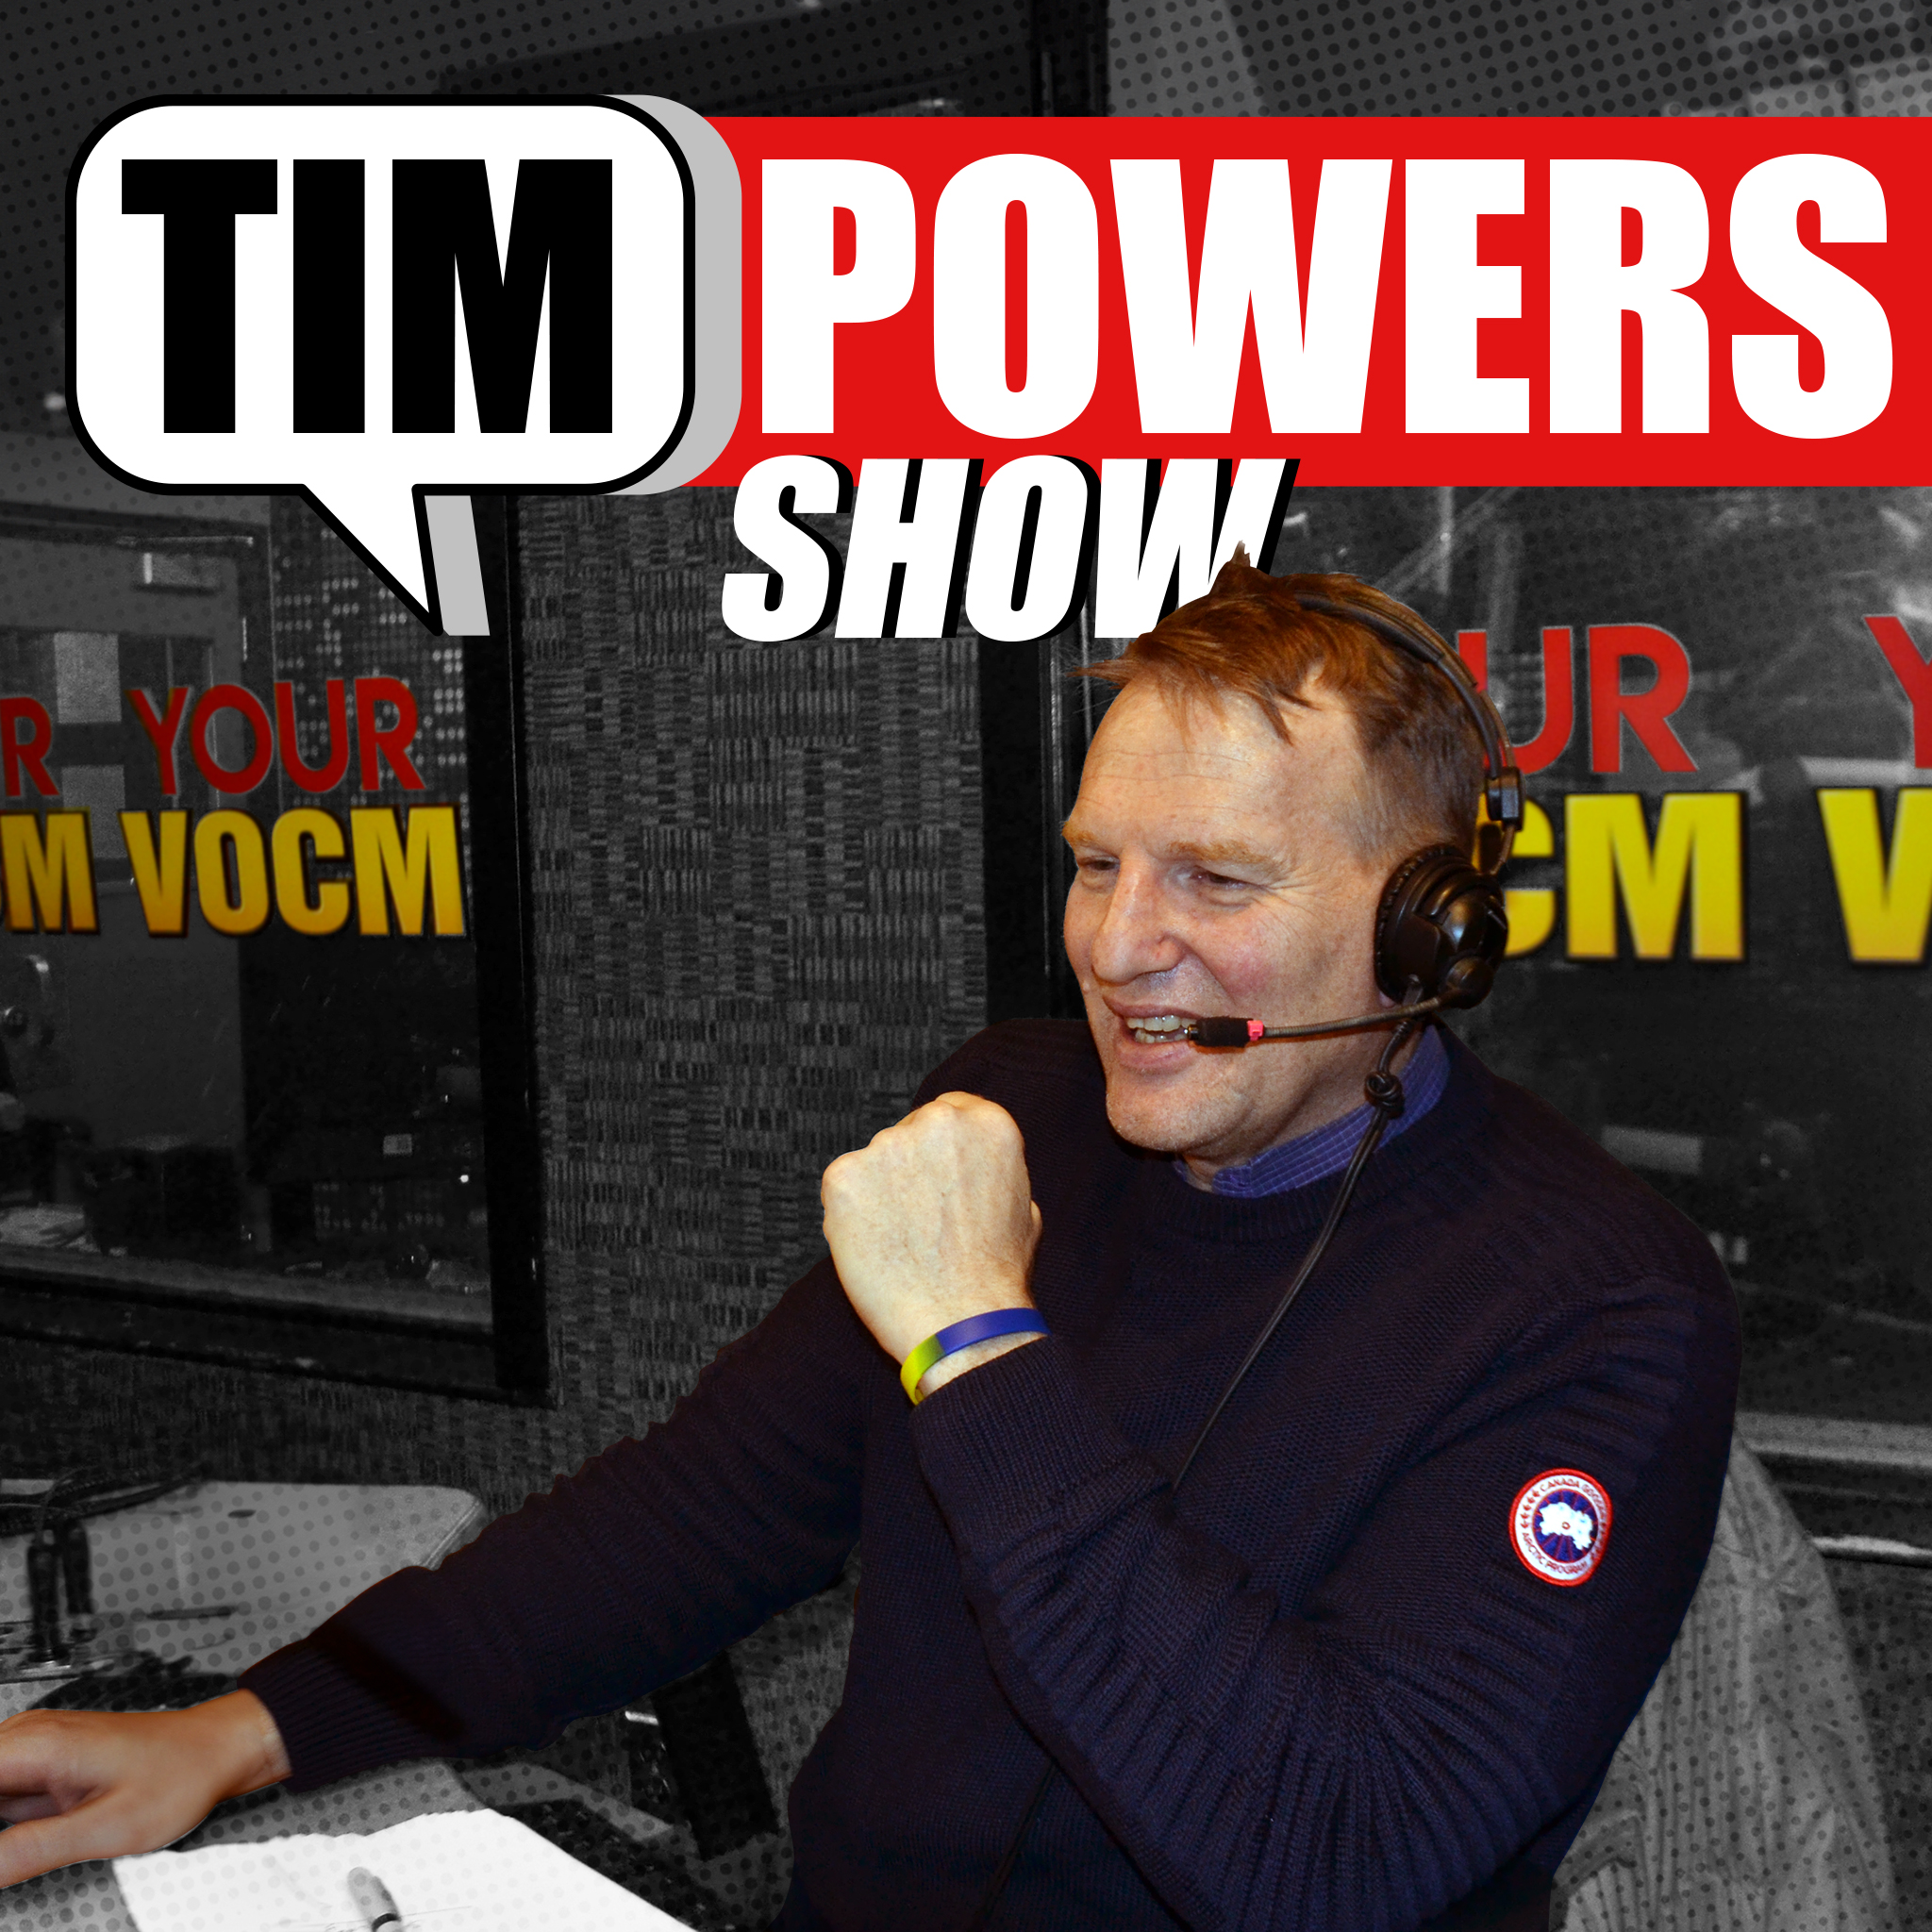 The Tim Powers Show, Tuesday May 21st